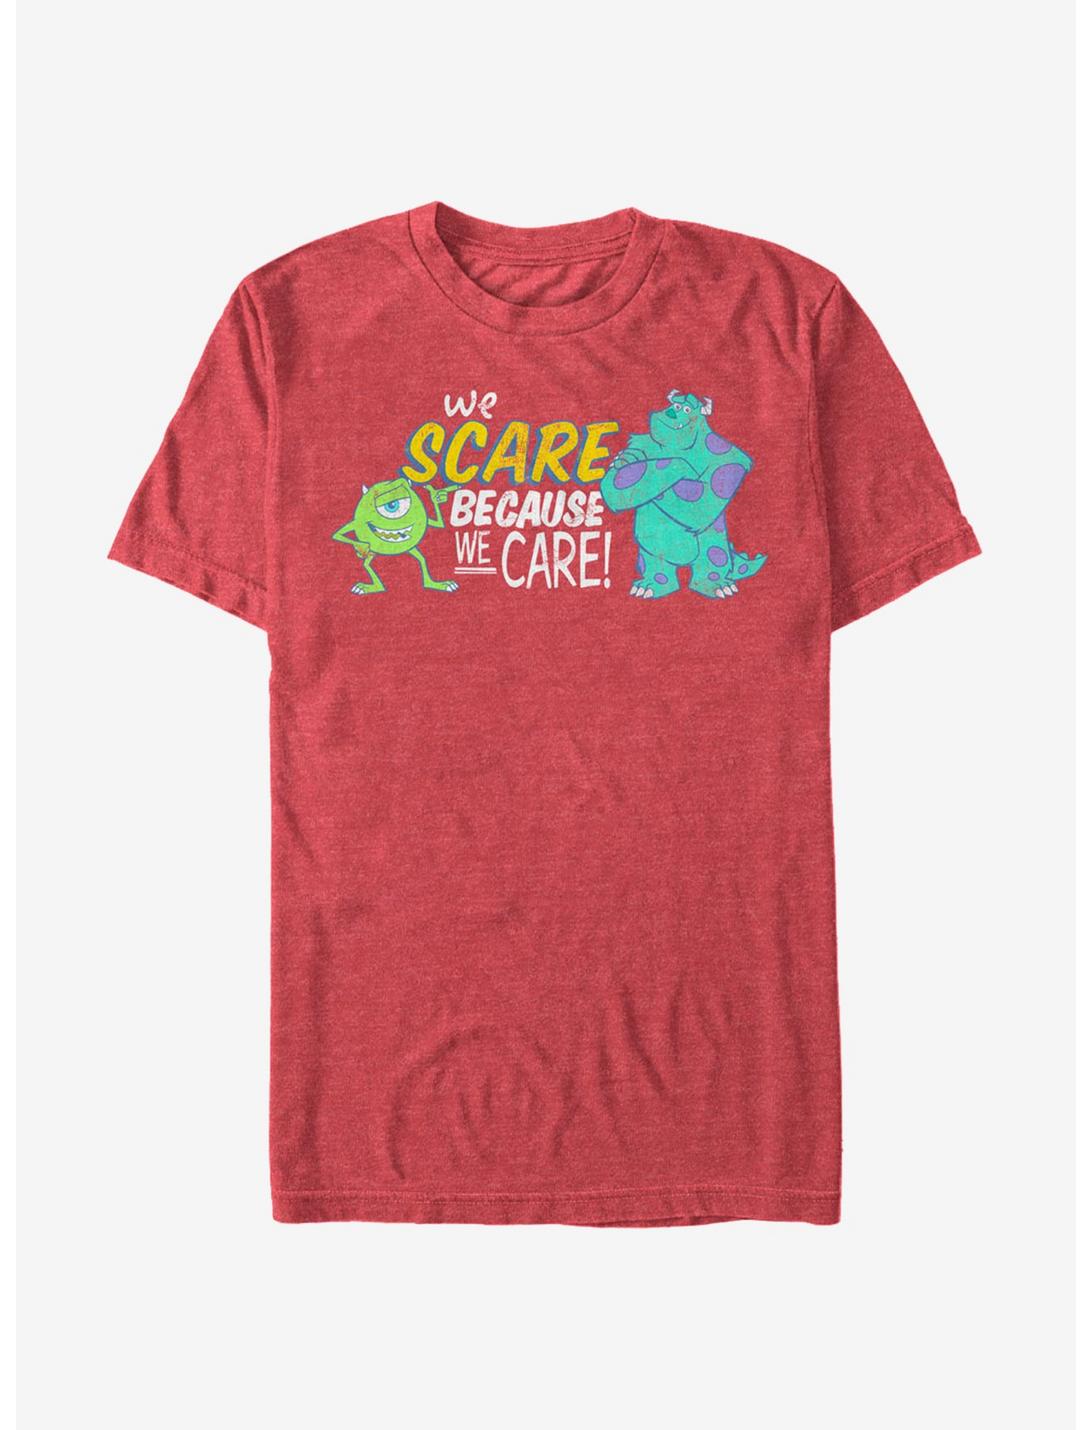 Monsters Inc. We Scare Because We Care Monsters T-Shirt, RED HTR, hi-res